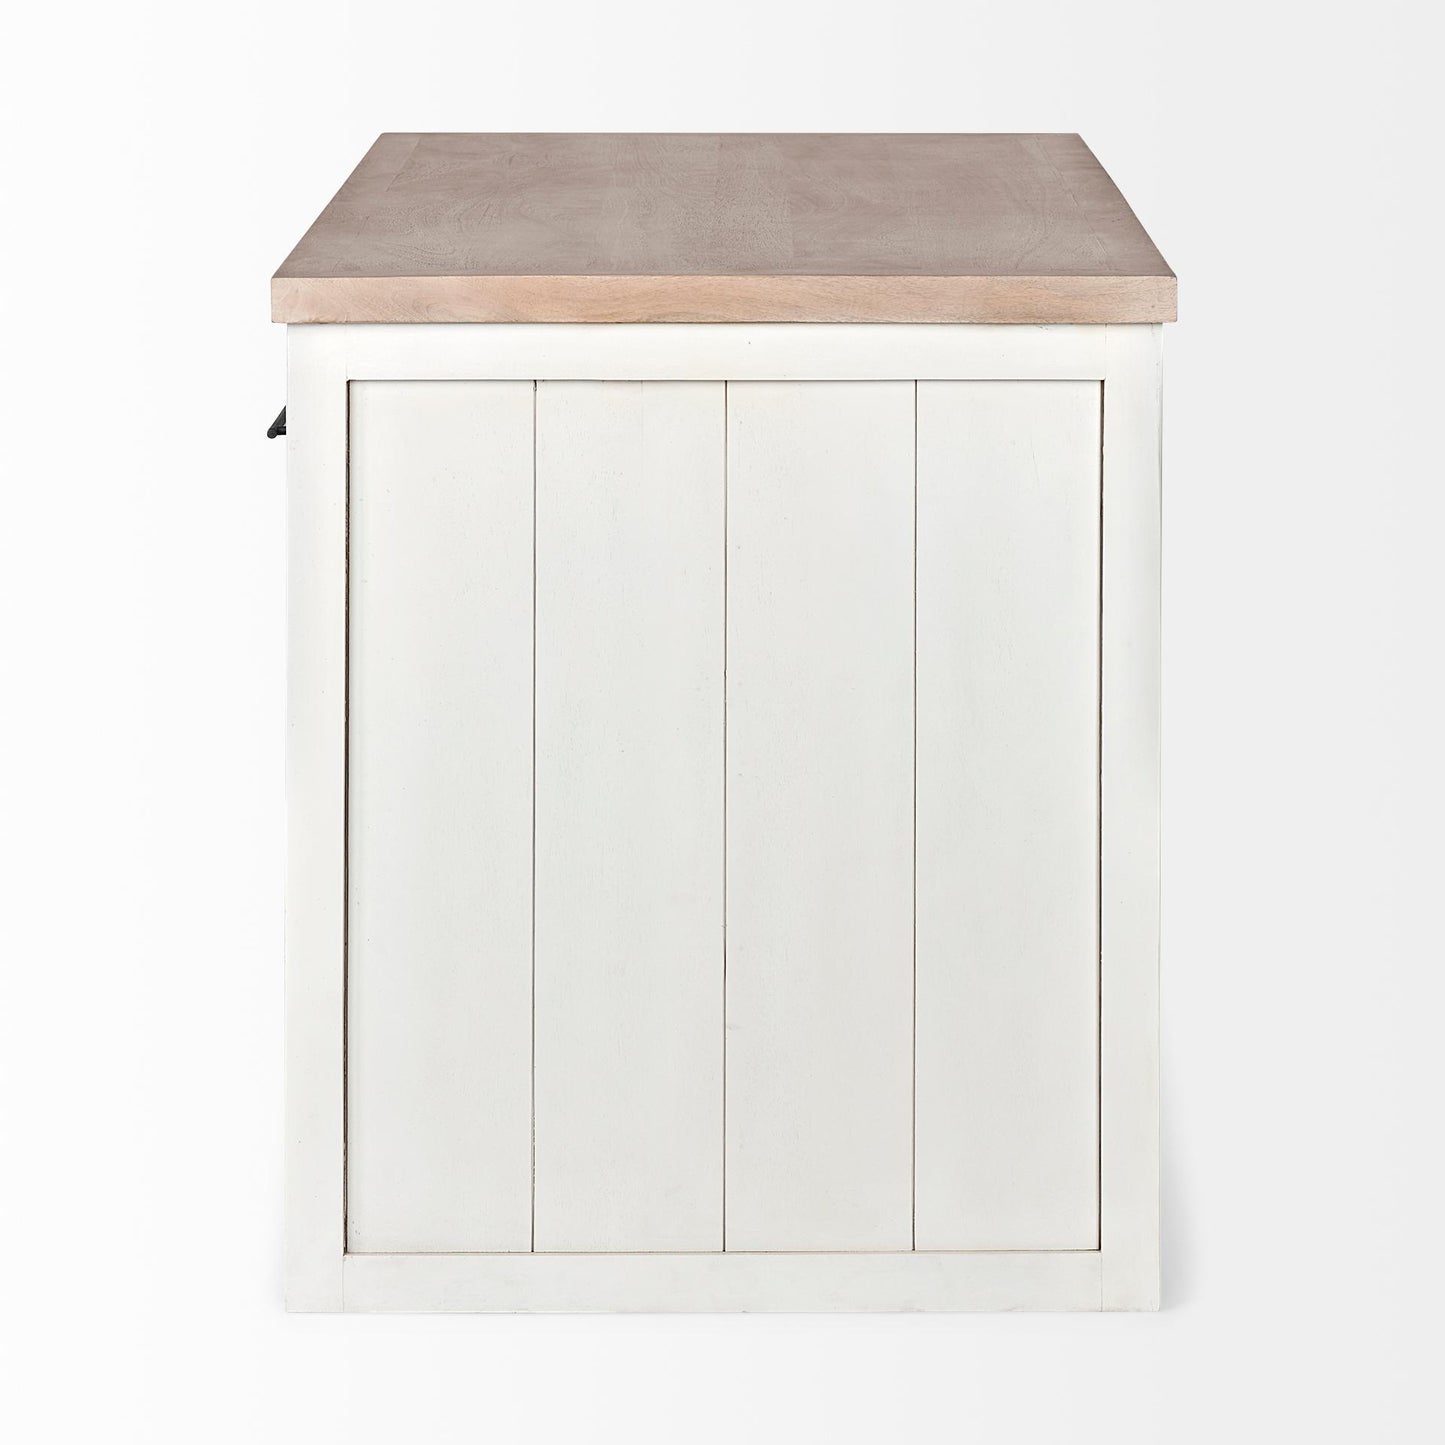 Fairview II White and Brown Two-Tone Stain Solid Wood Kitchen Island